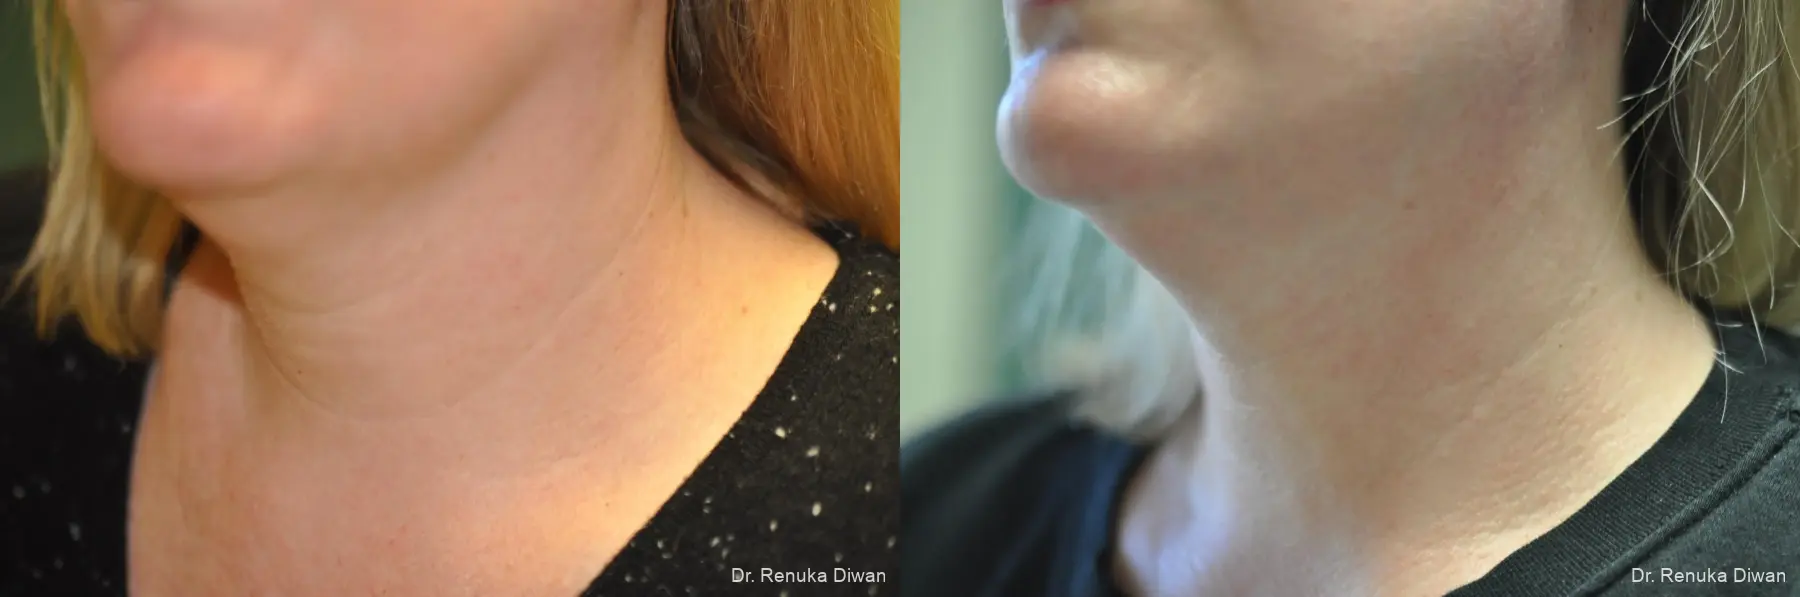 Neck Creases: Patient 5 - Before and After 3